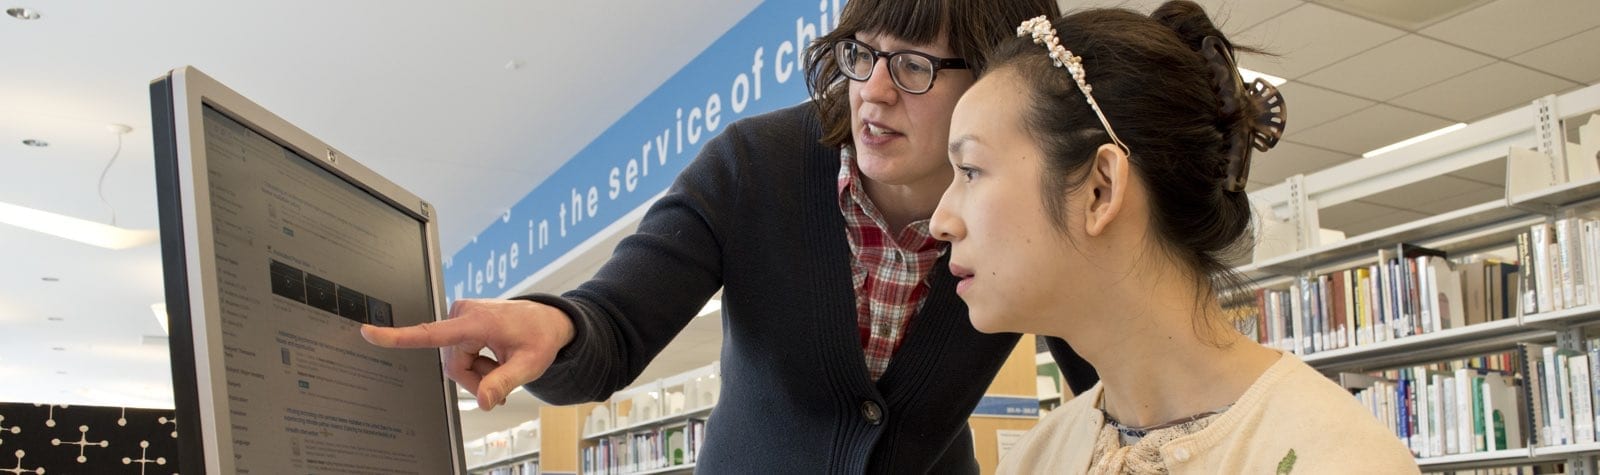 Librarian helping student